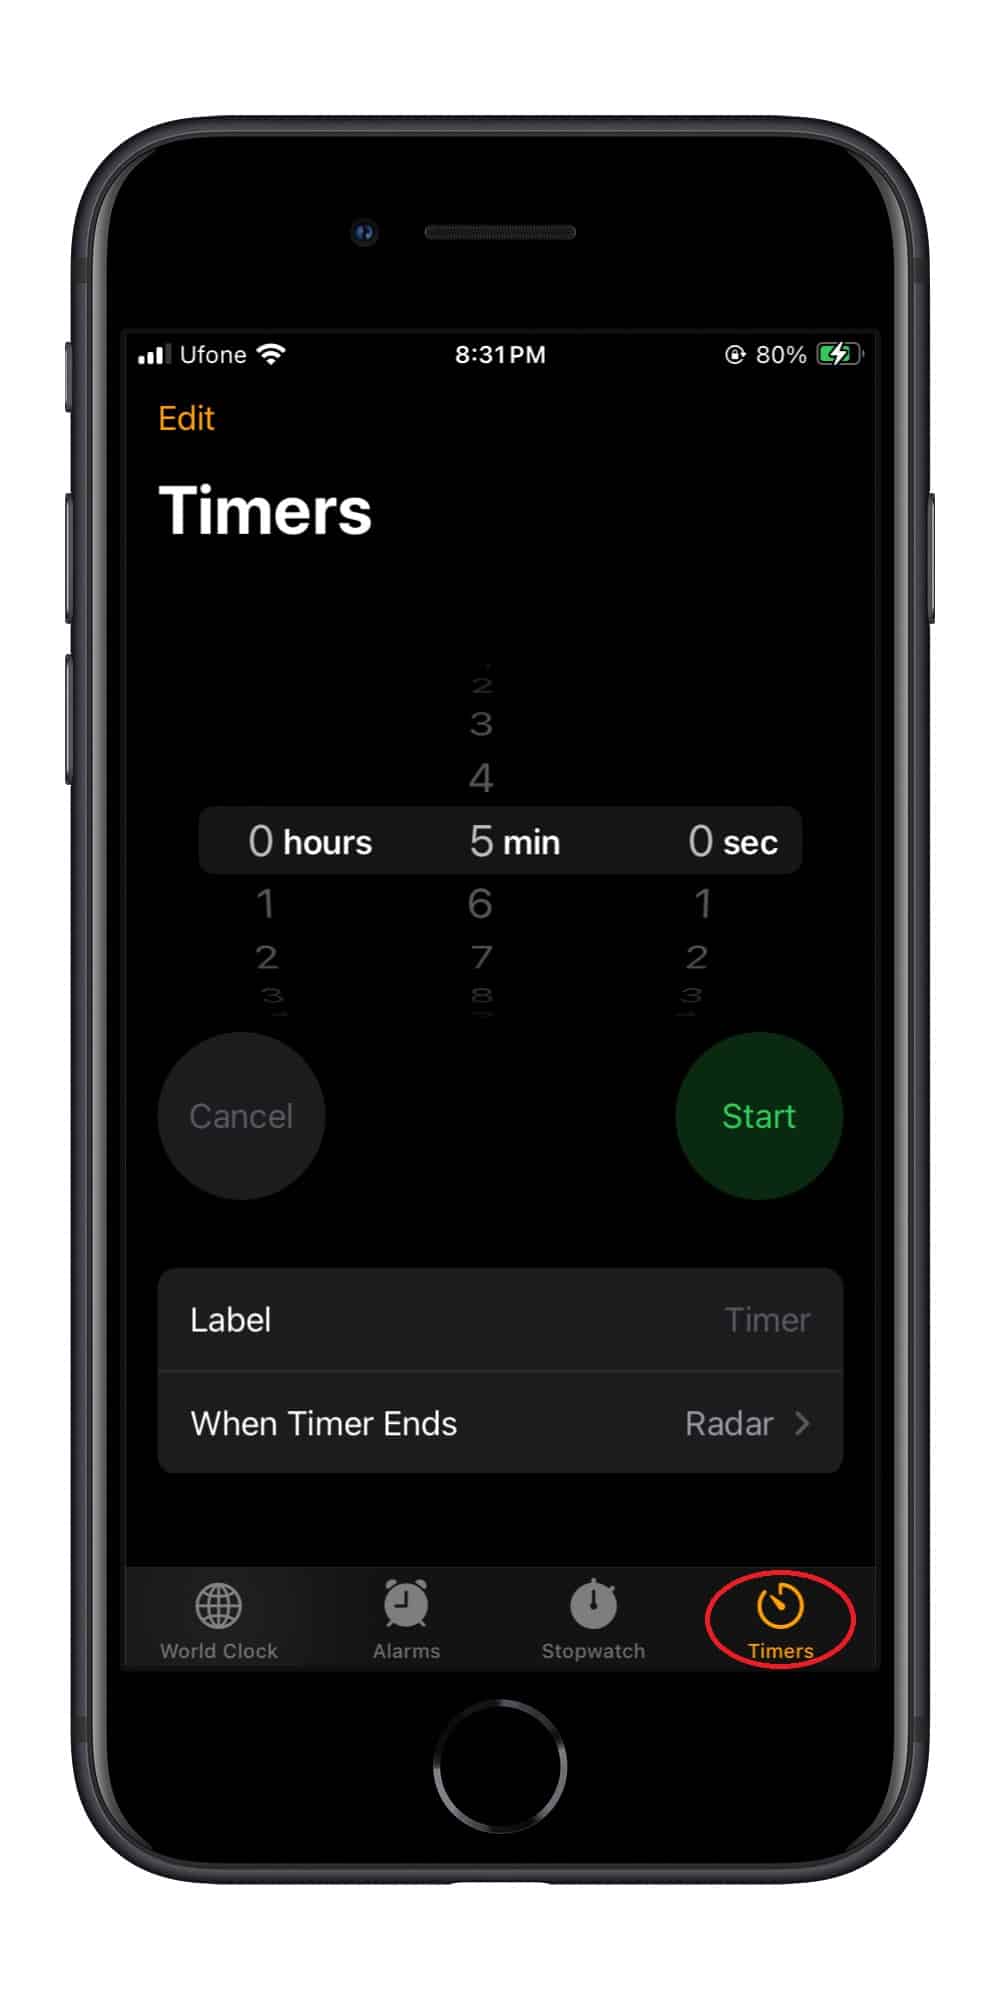 How to set multiple timers on iPhone with iOS 17